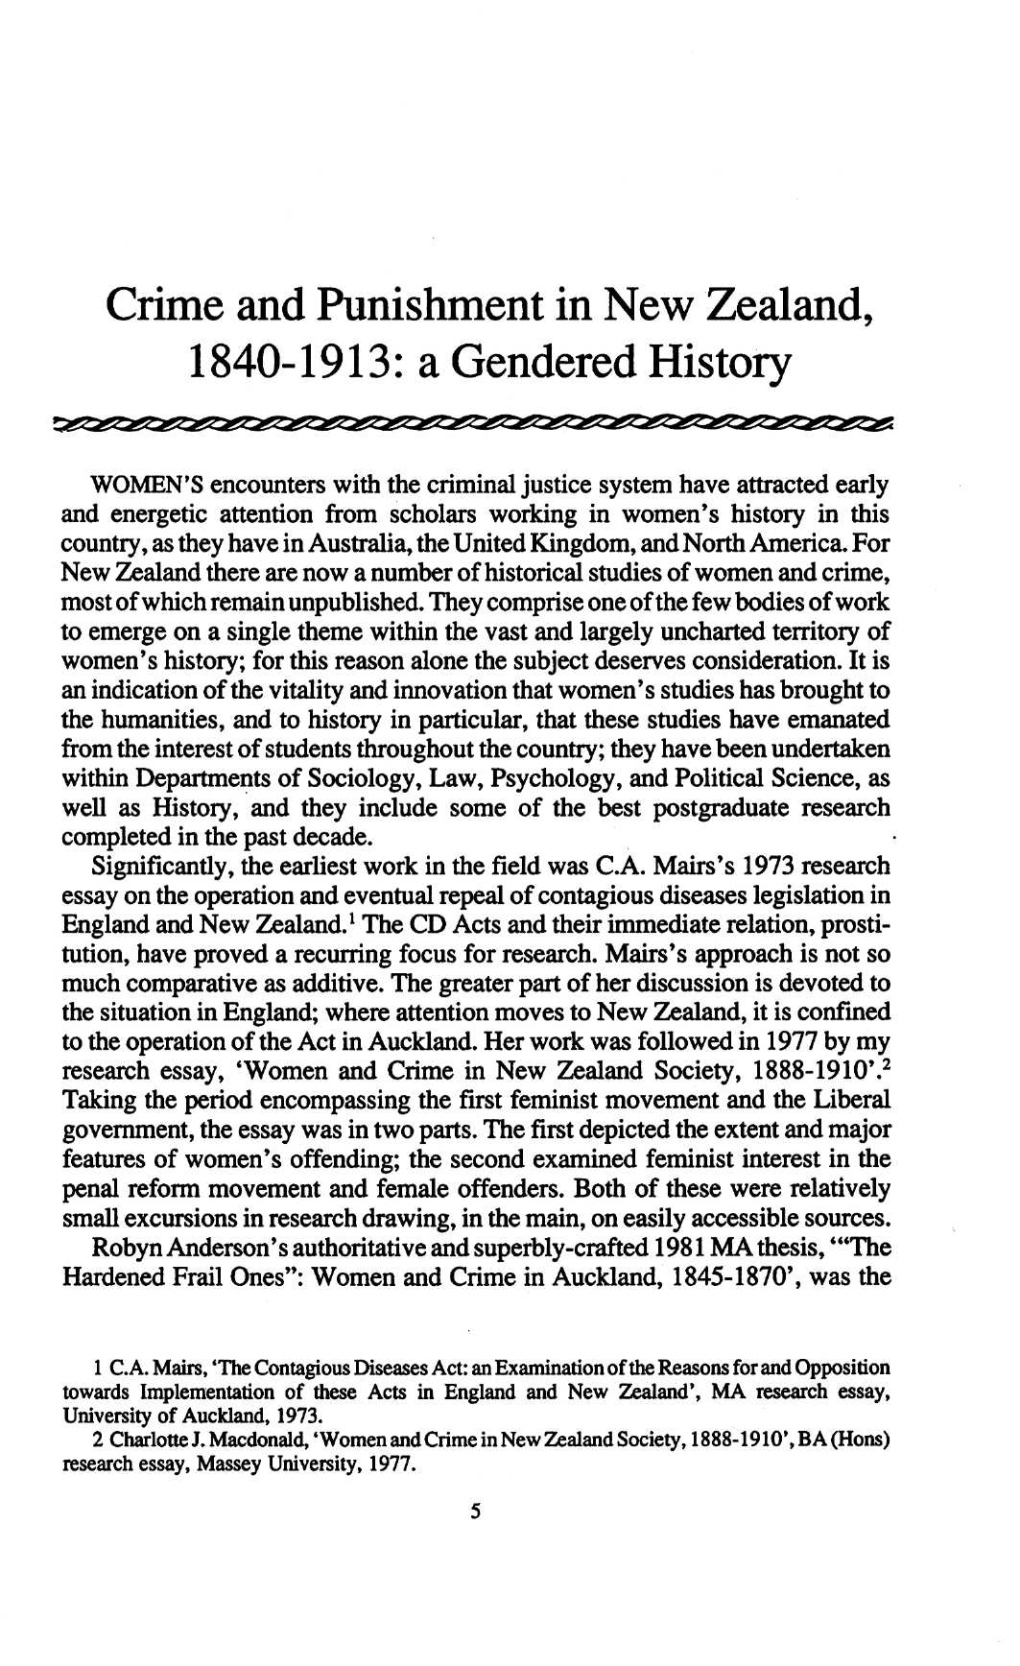 Crime and Punishment in New Zealand, 1840-1913: a Gendered History